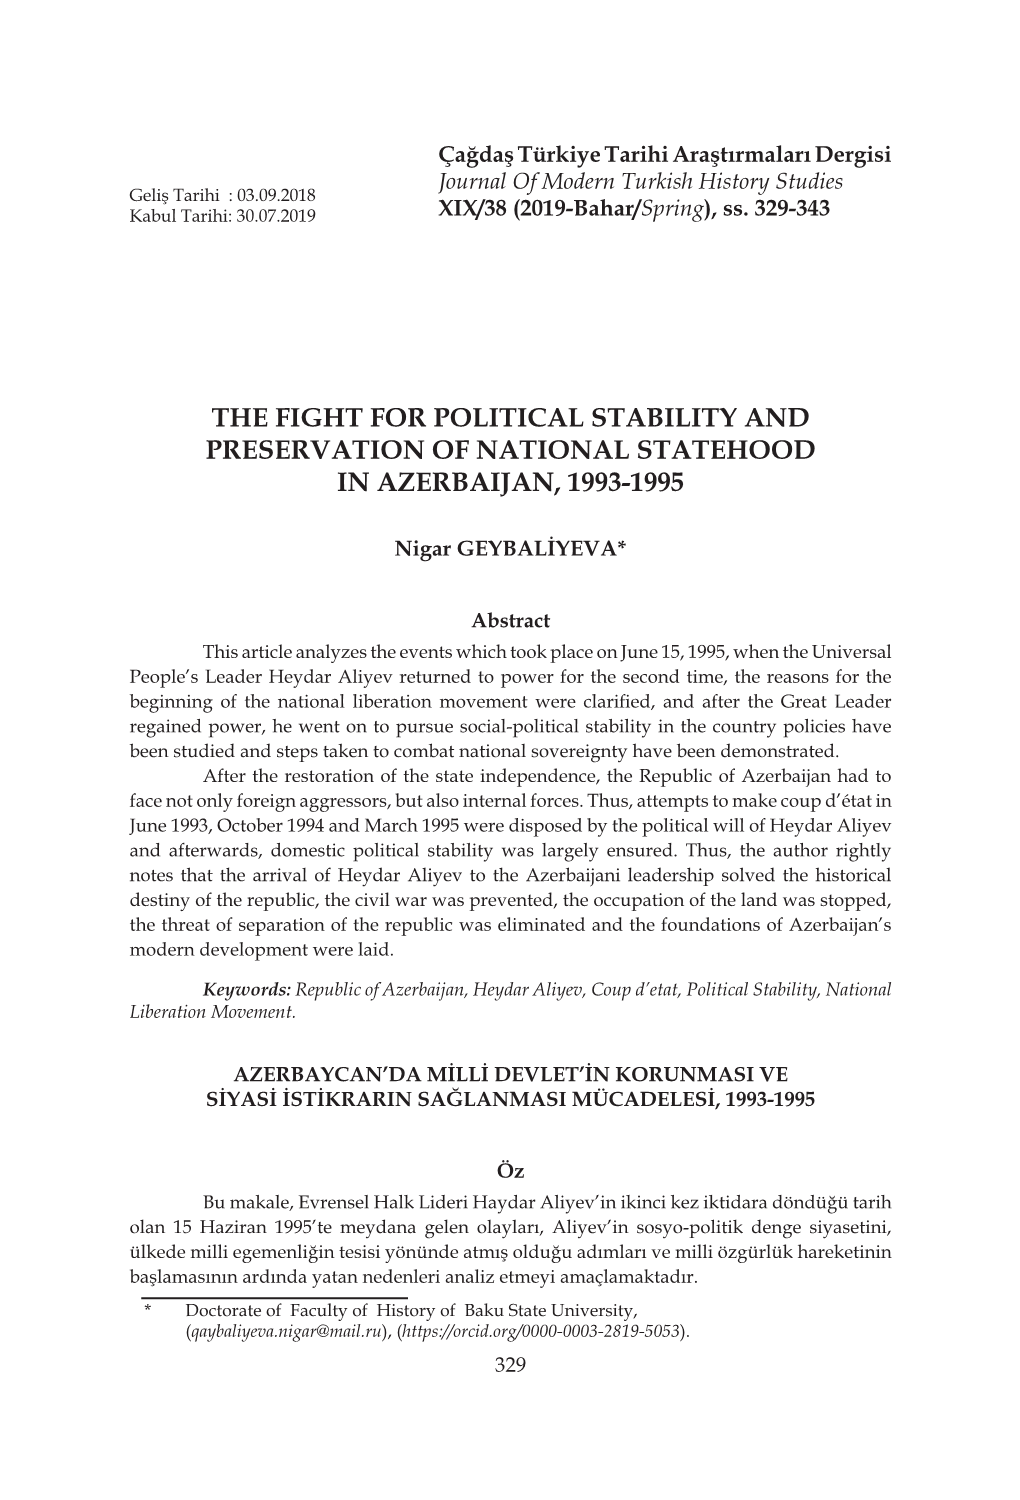 The Fight for Political Stability and Preservation of National Statehood in Azerbaijan, 1993-1995